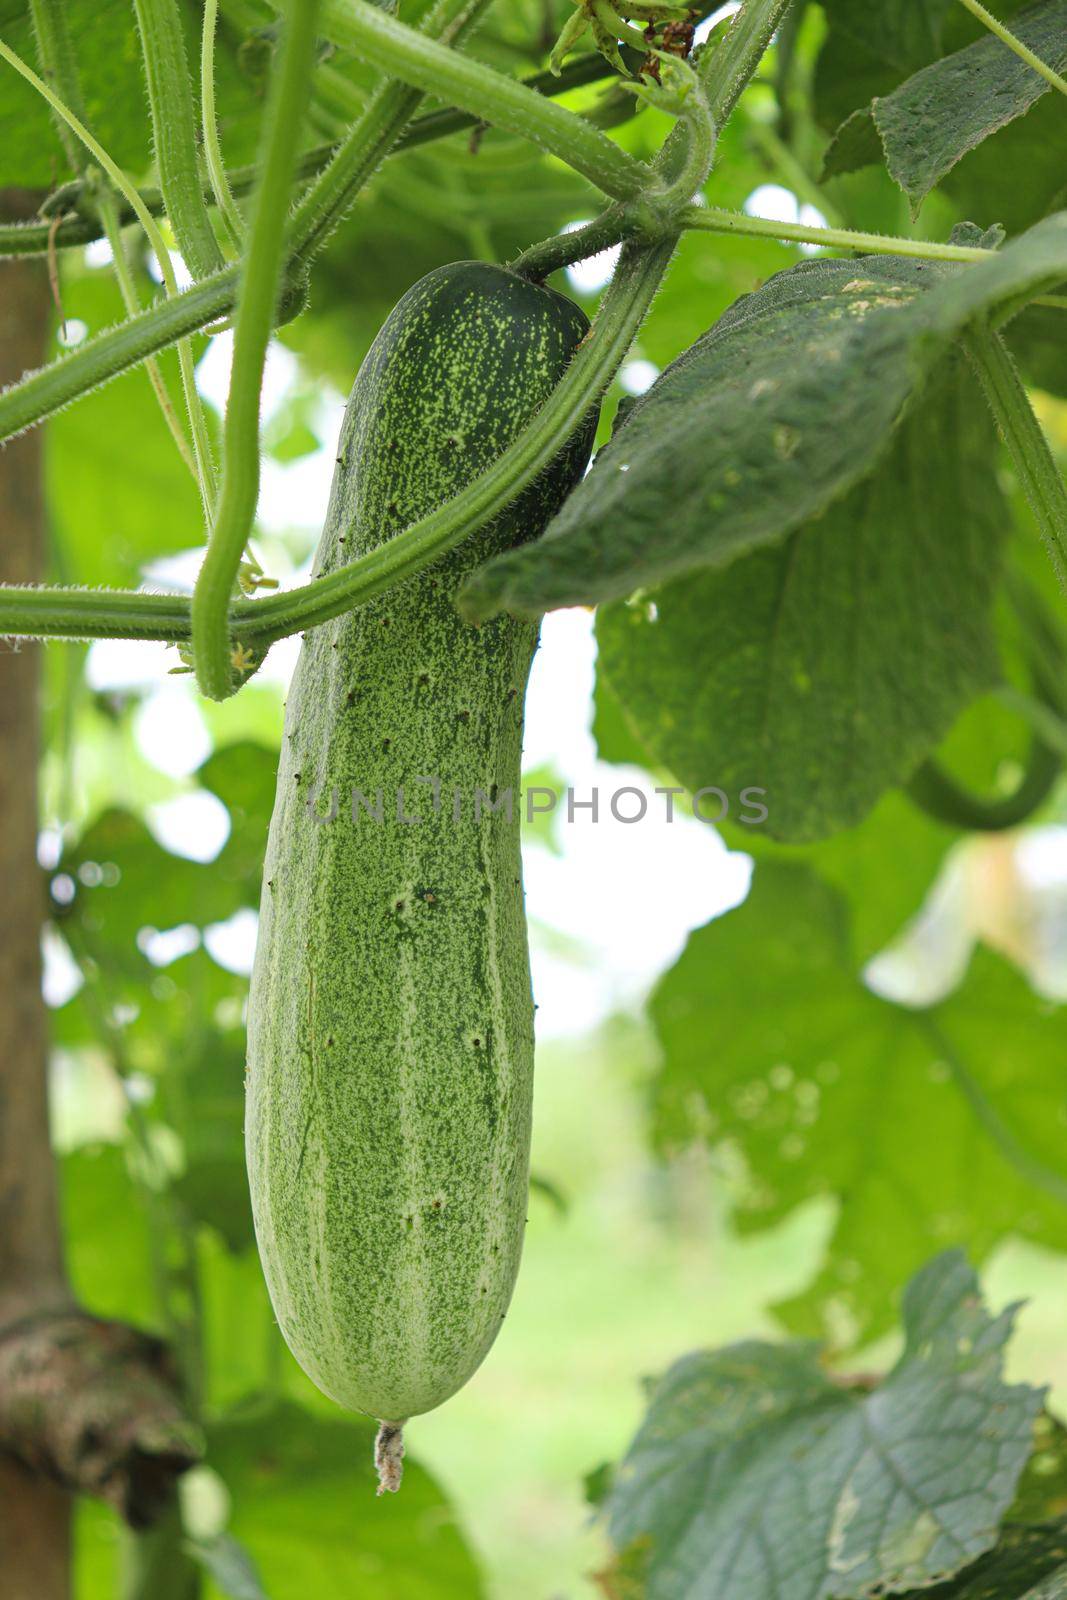 cucumber on tree in farm for harvest by jahidul2358